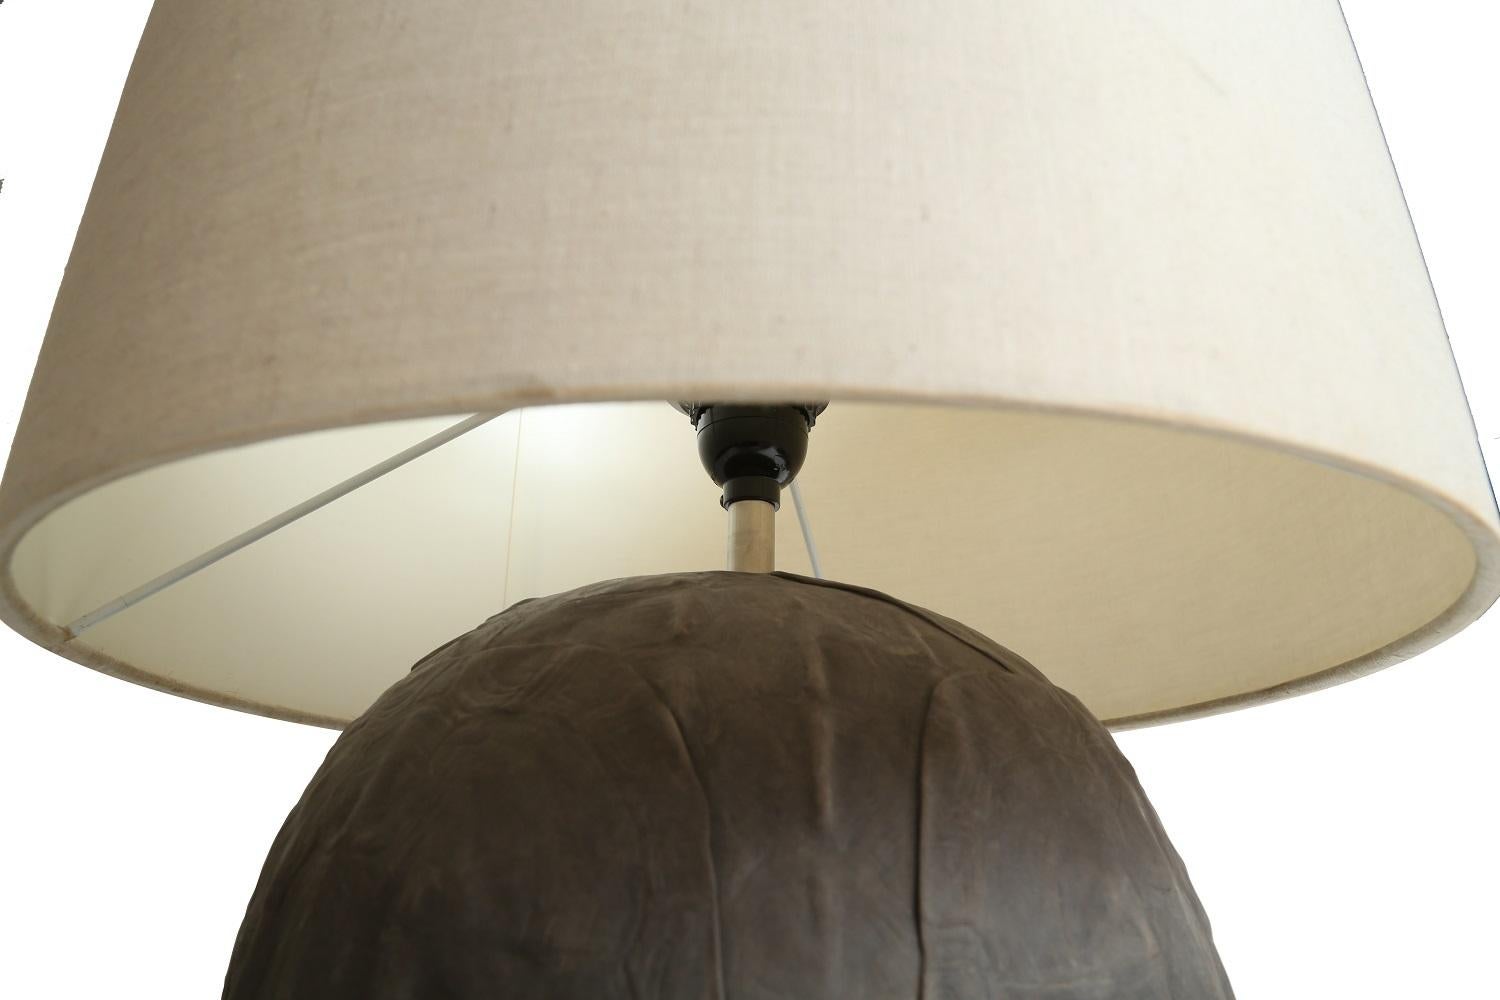 French Giles Caffier Turtle Molded Ceramic Round Table Lamp, Made in Paris